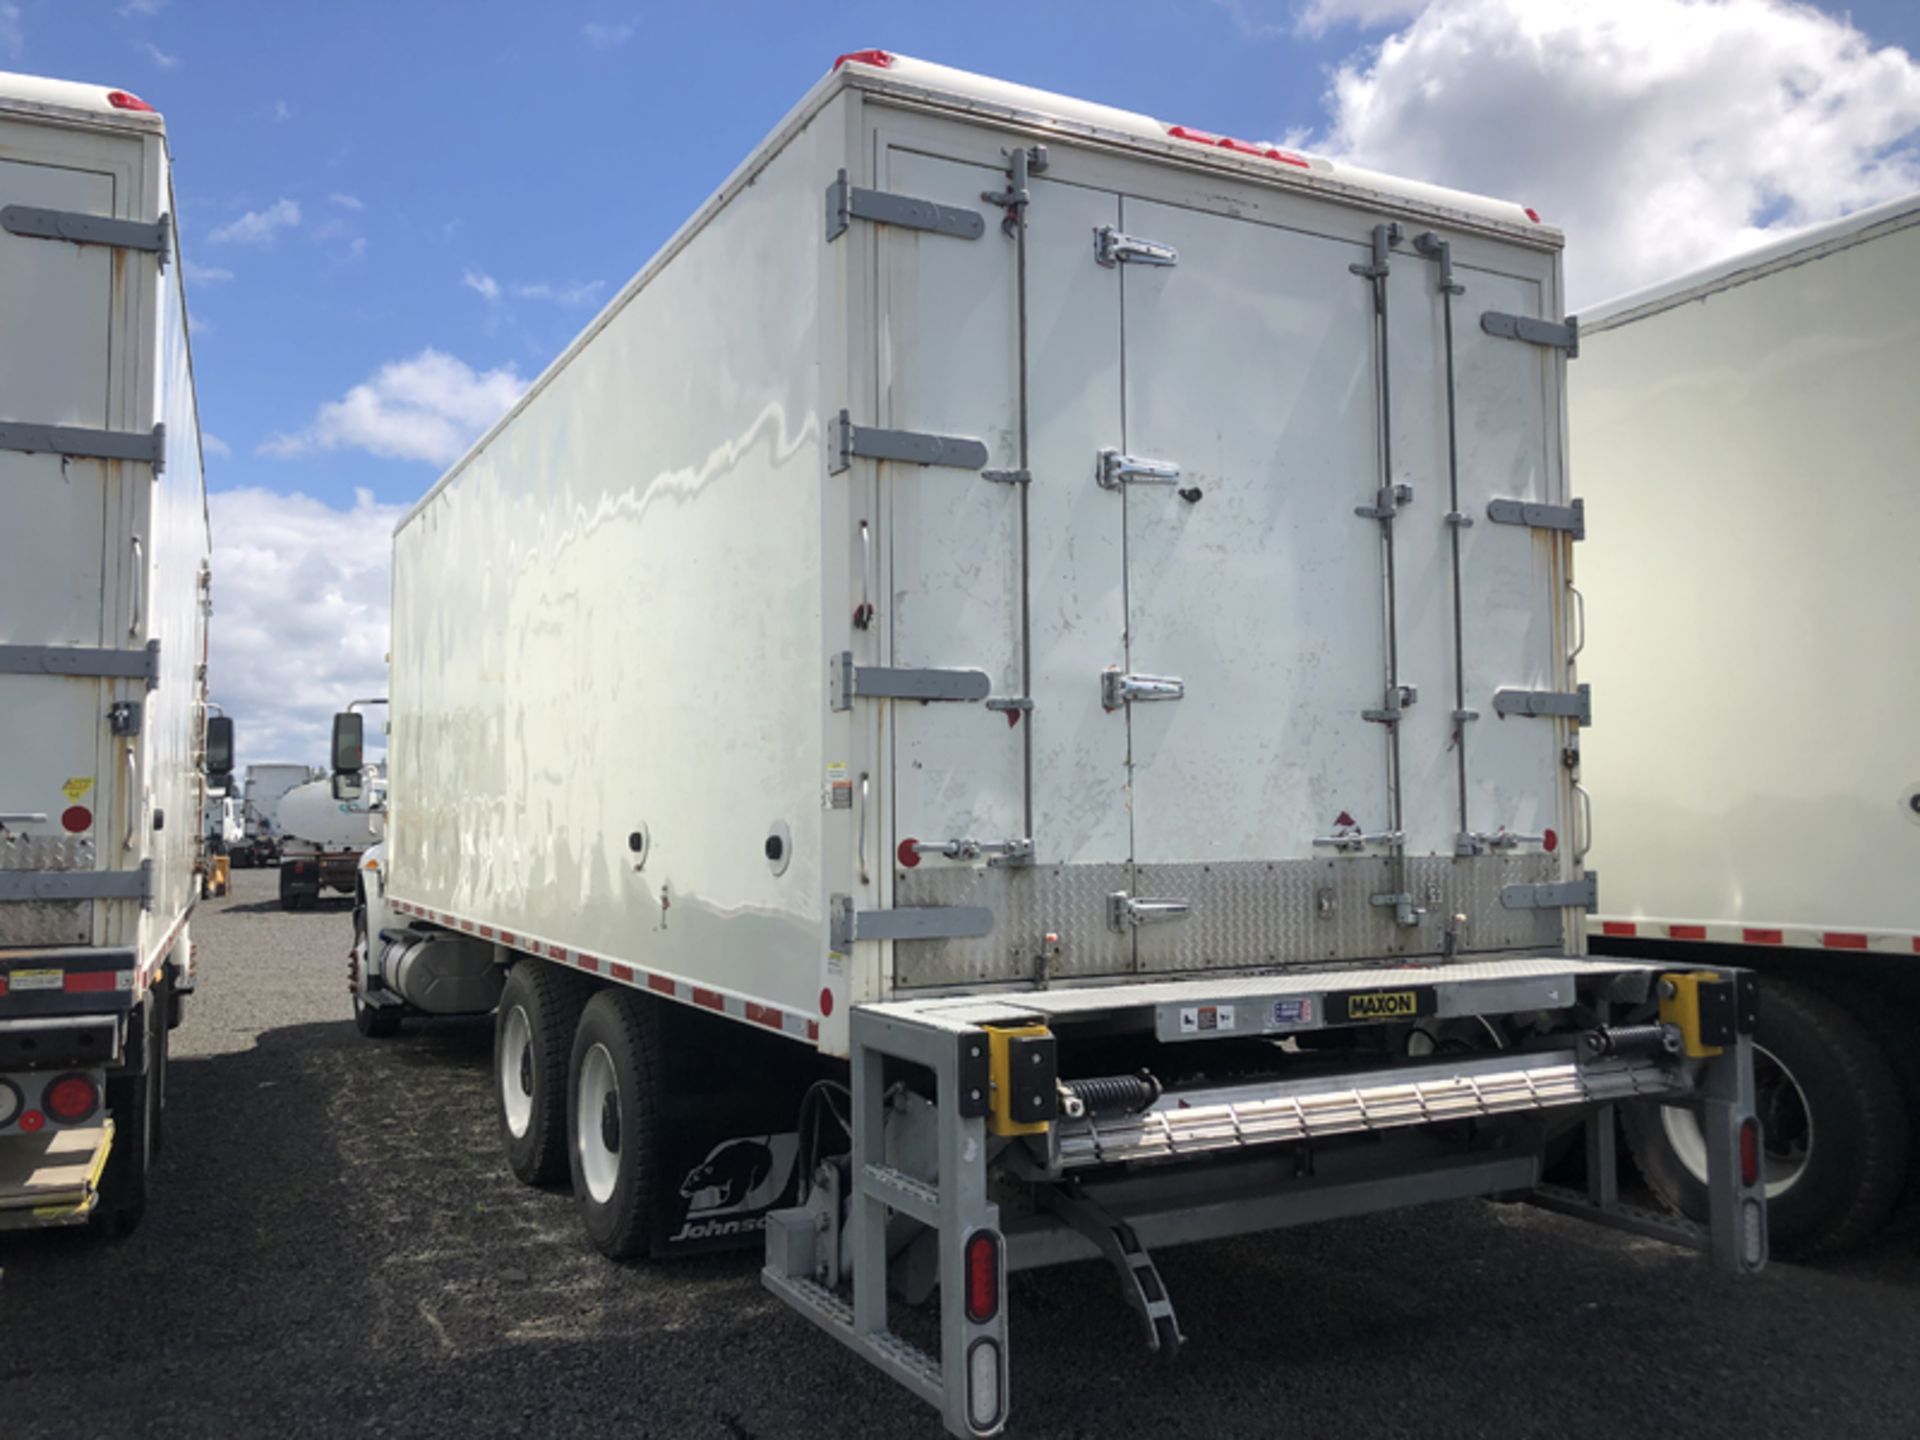 2018 INTERNATIONAL 4400 SBA 6X4 REFRIGERATED BOX TRUCK VIN#: 1HTMSTAR6JH529839, Approx Miles: 36496, - Image 5 of 12